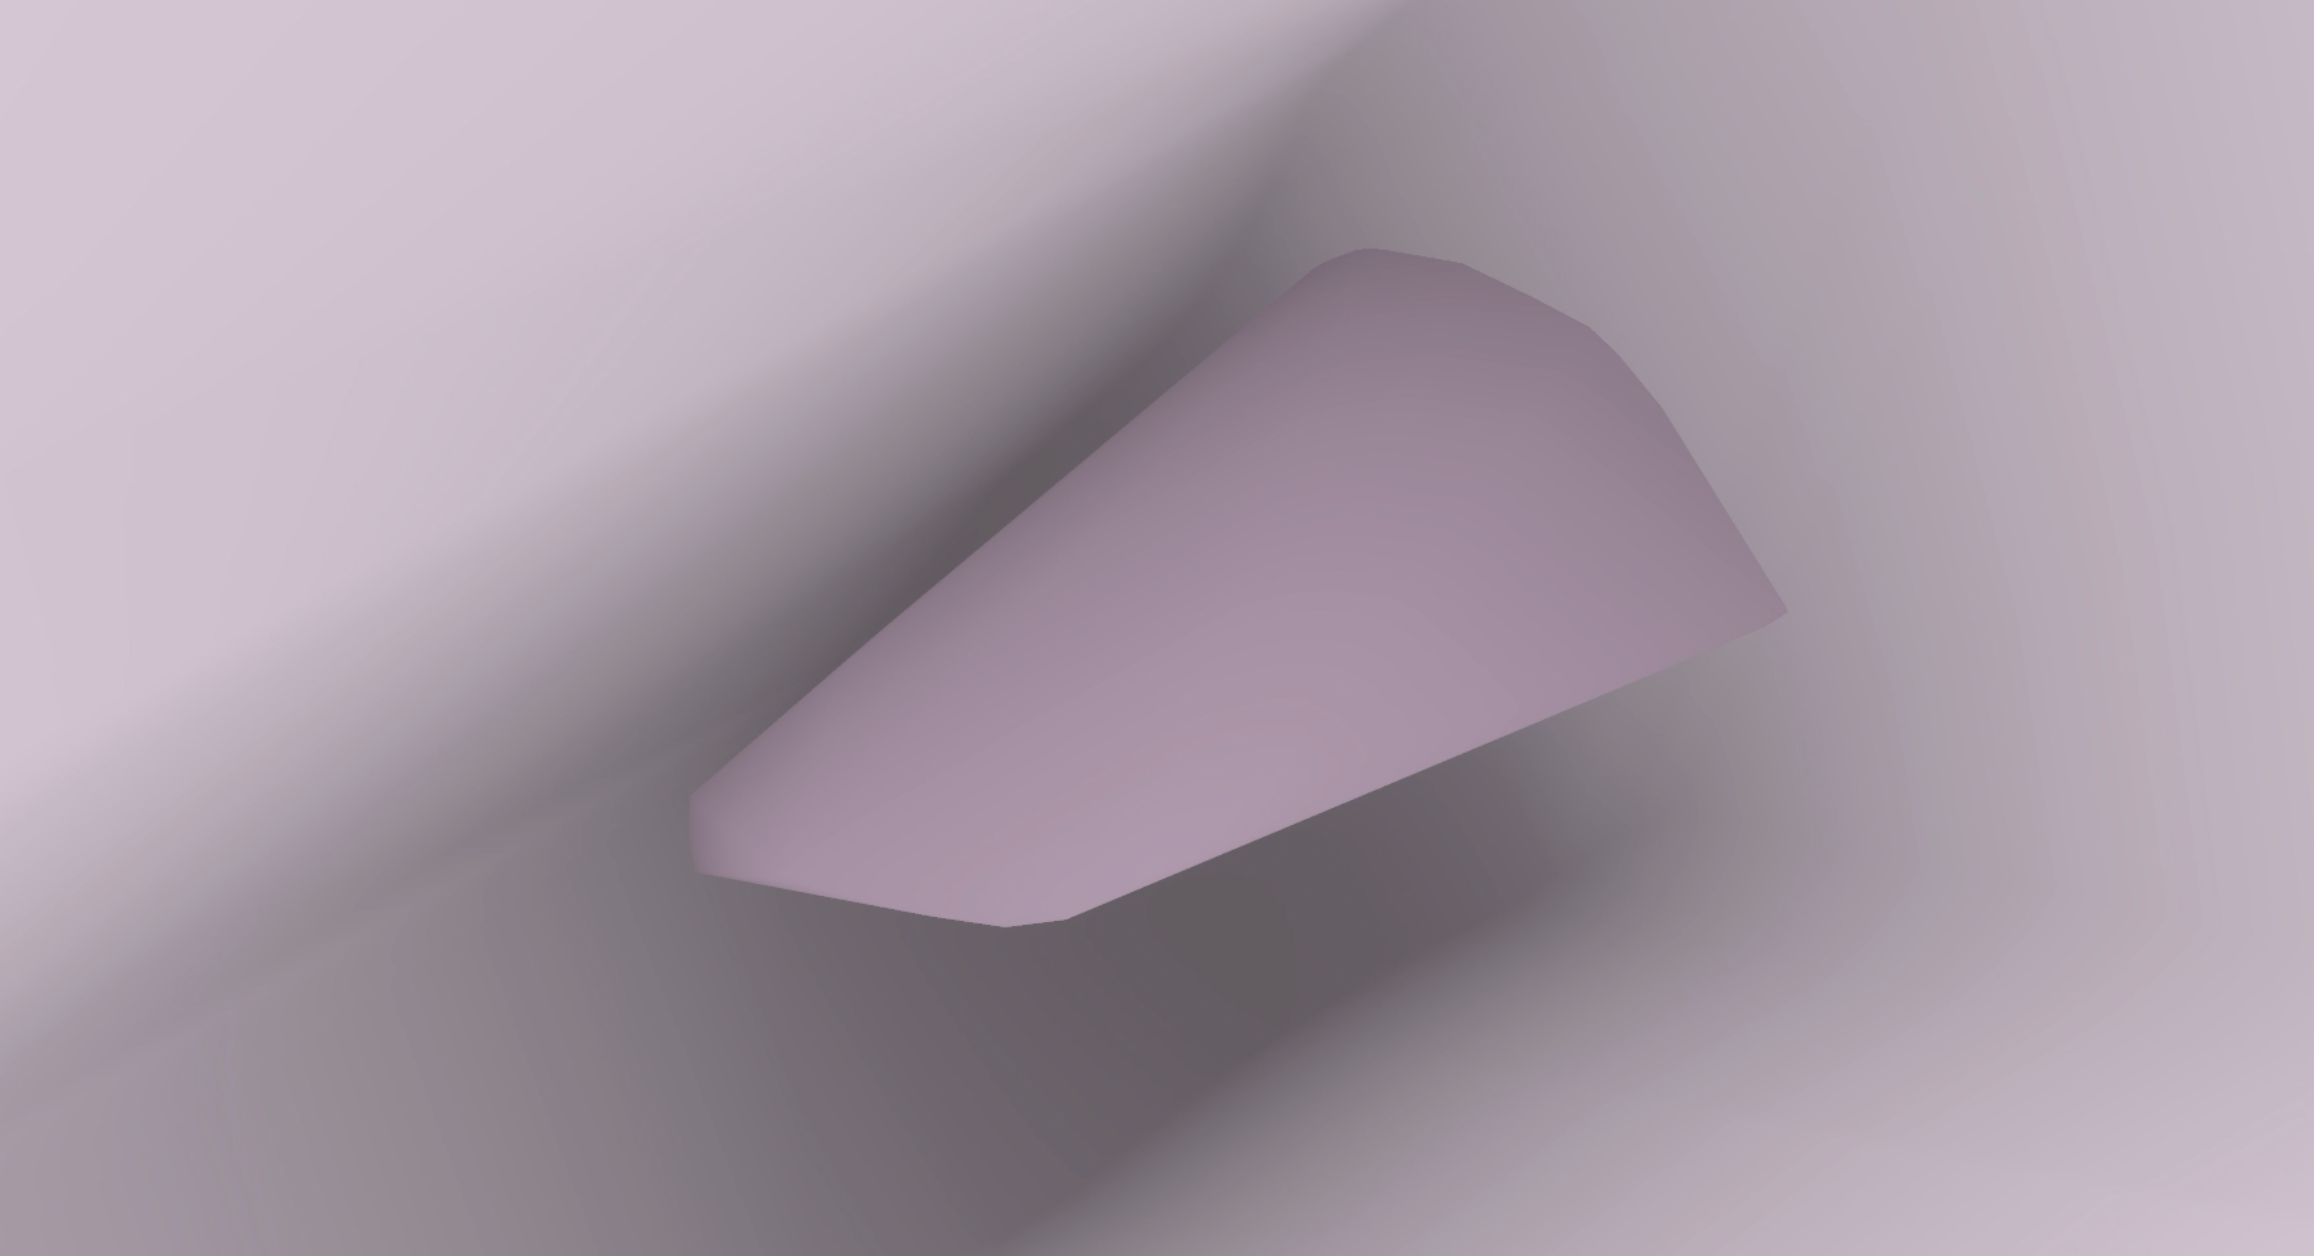 A digital image of a VR world created by artist Caroline Coolidge showing the interior of a pale pink semi-circular object with another large pale pink, somewhat more angular form in the center.